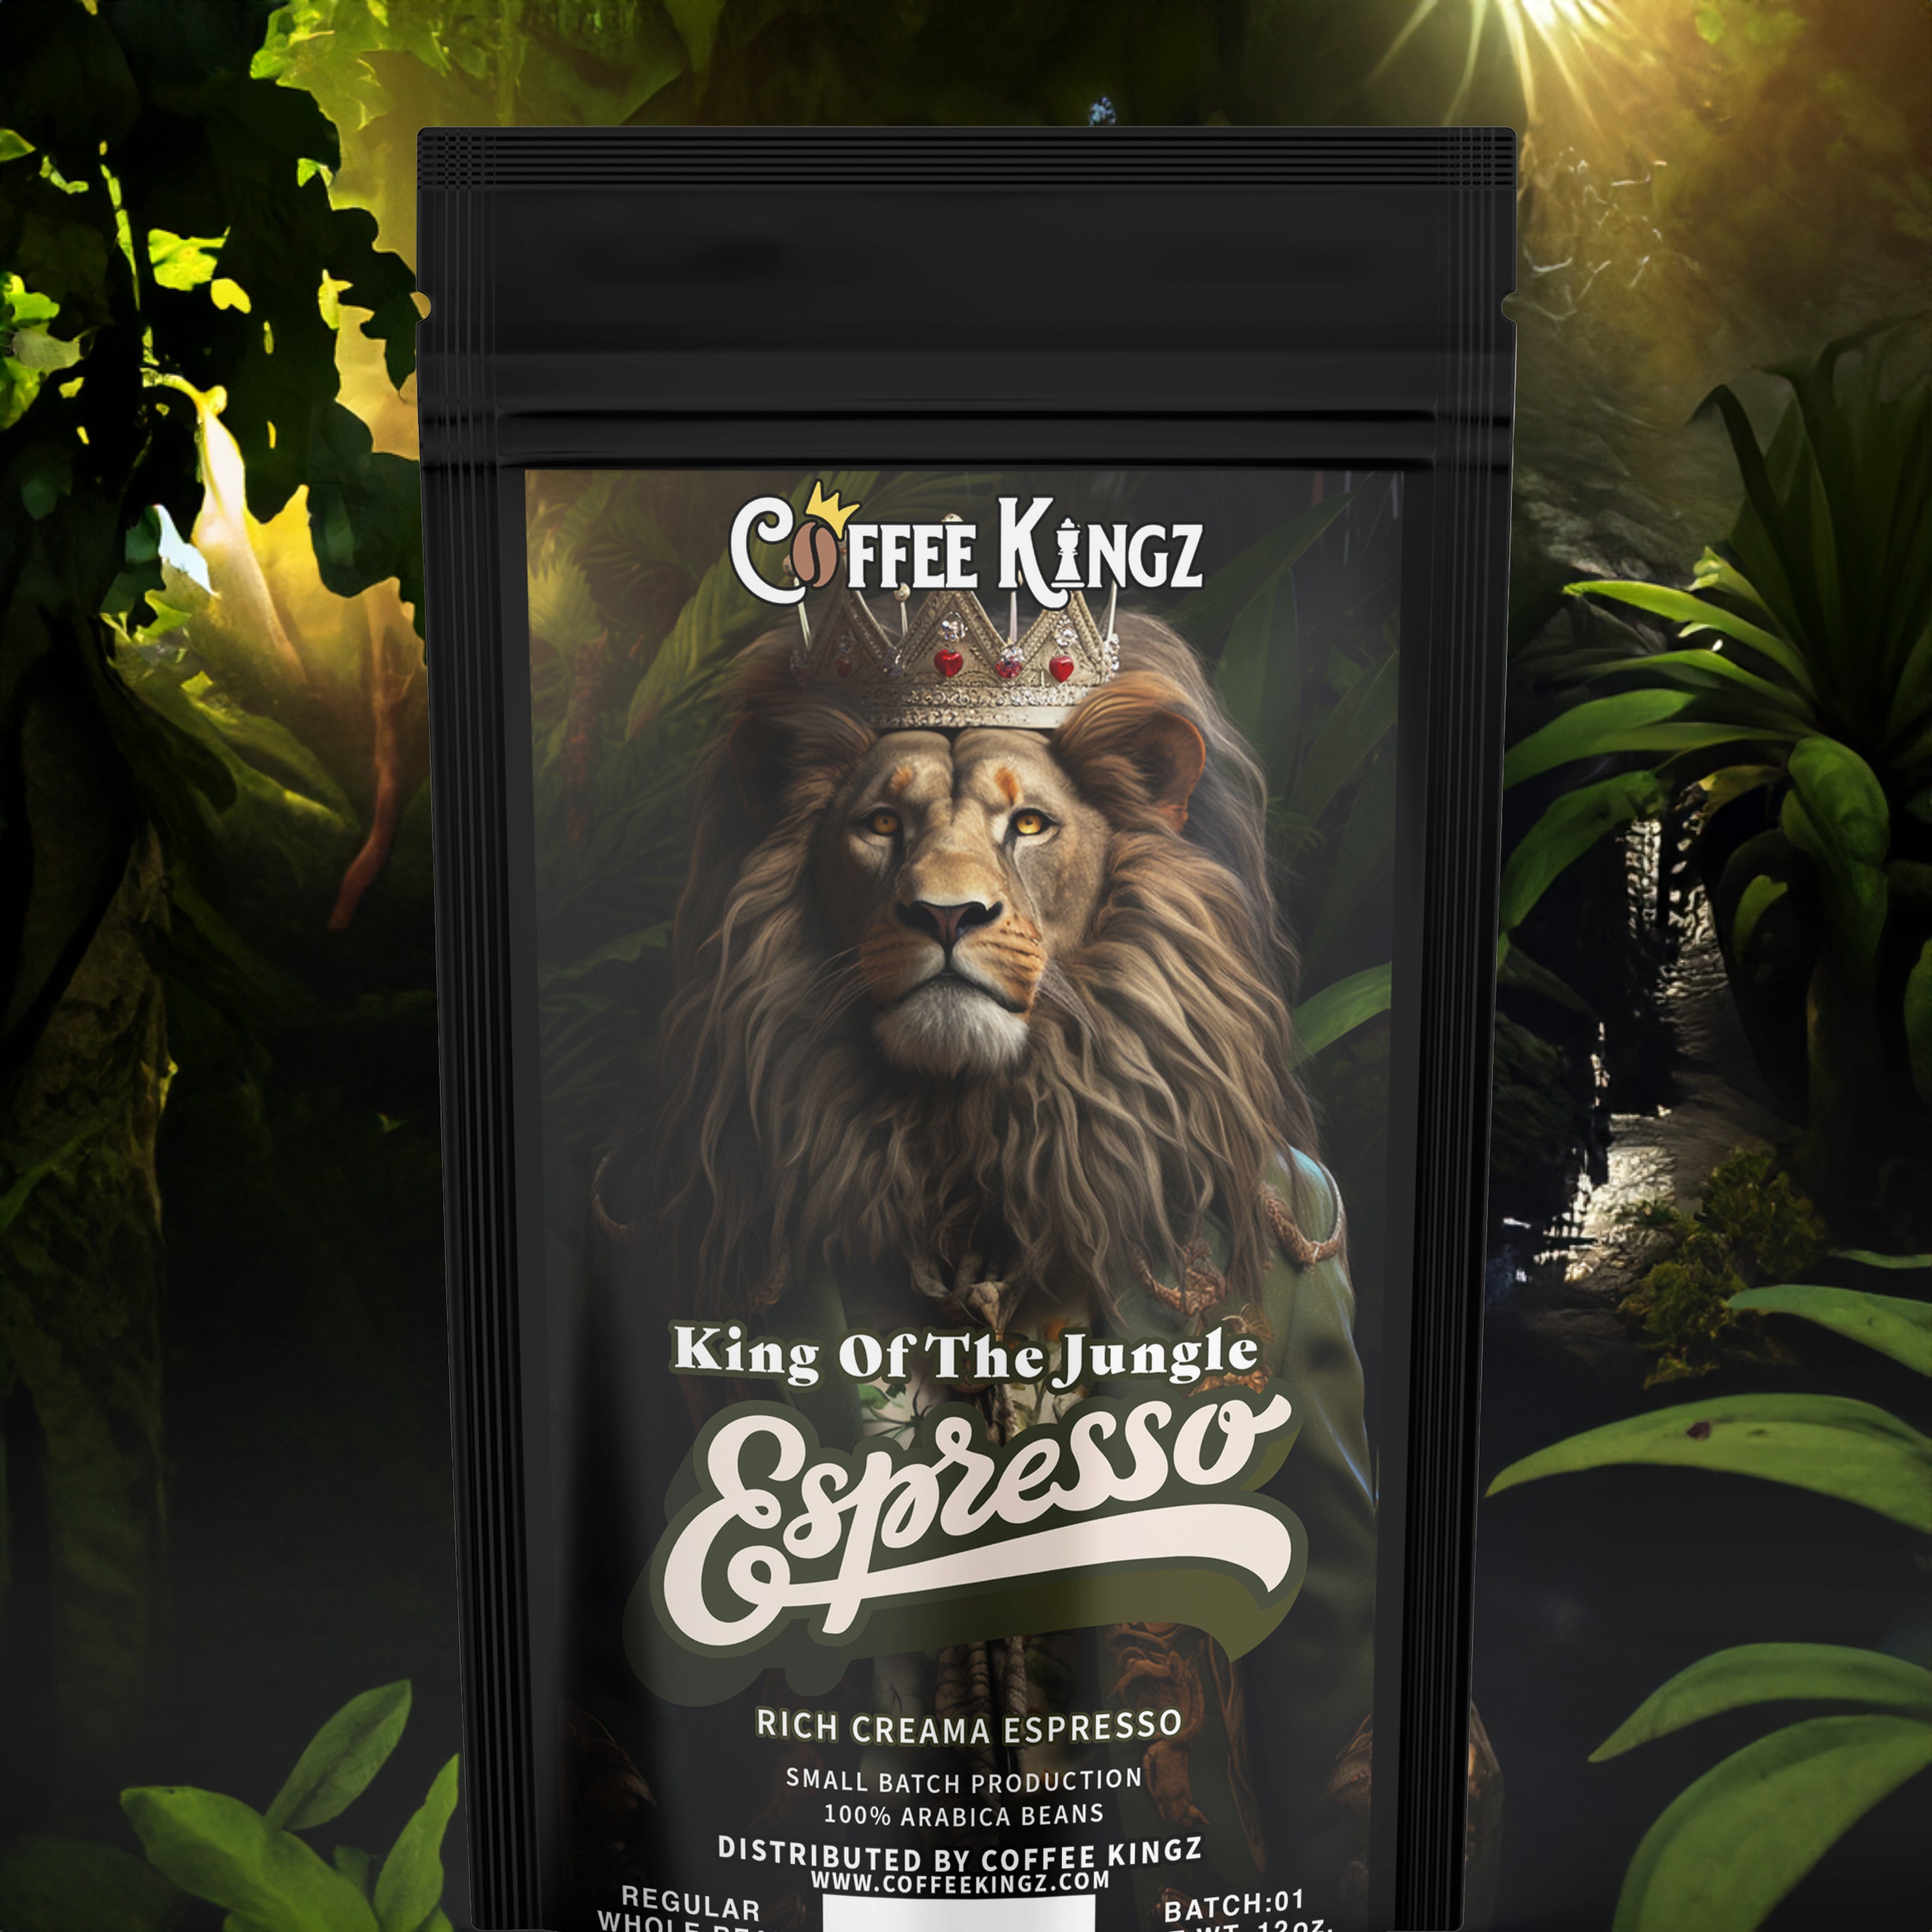 A majestic lion crowned and styled as a king amidst lush foliage promotes "king of the jungle espresso" by Coffee Kingz, highlighting its rich espresso, small-batch production, and 100% arab